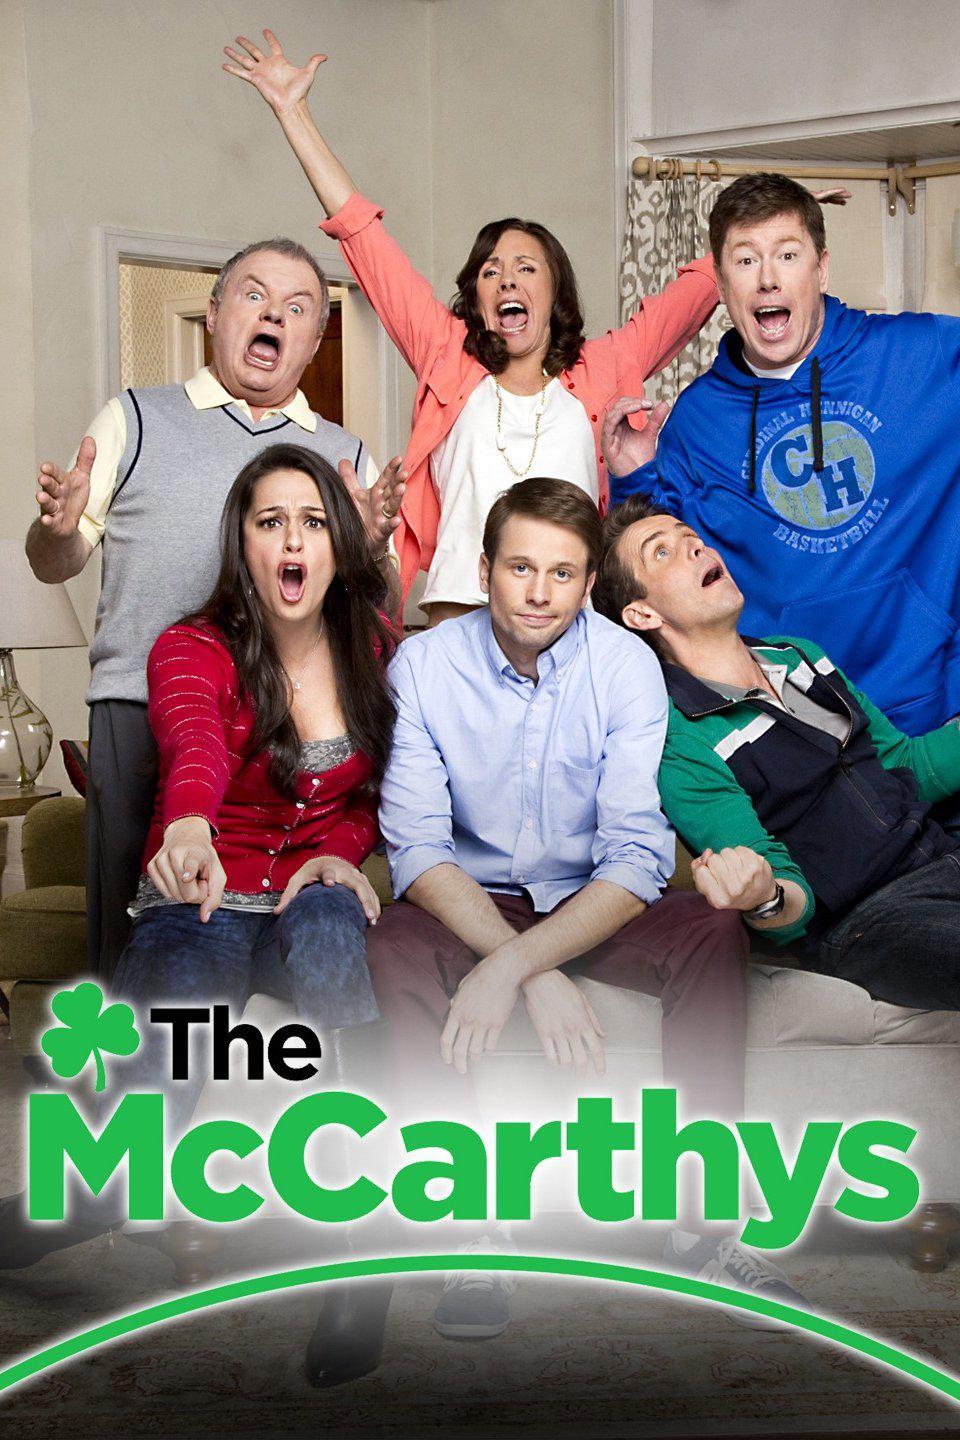 TV ratings for The McCarthys in Alemania. CBS TV series